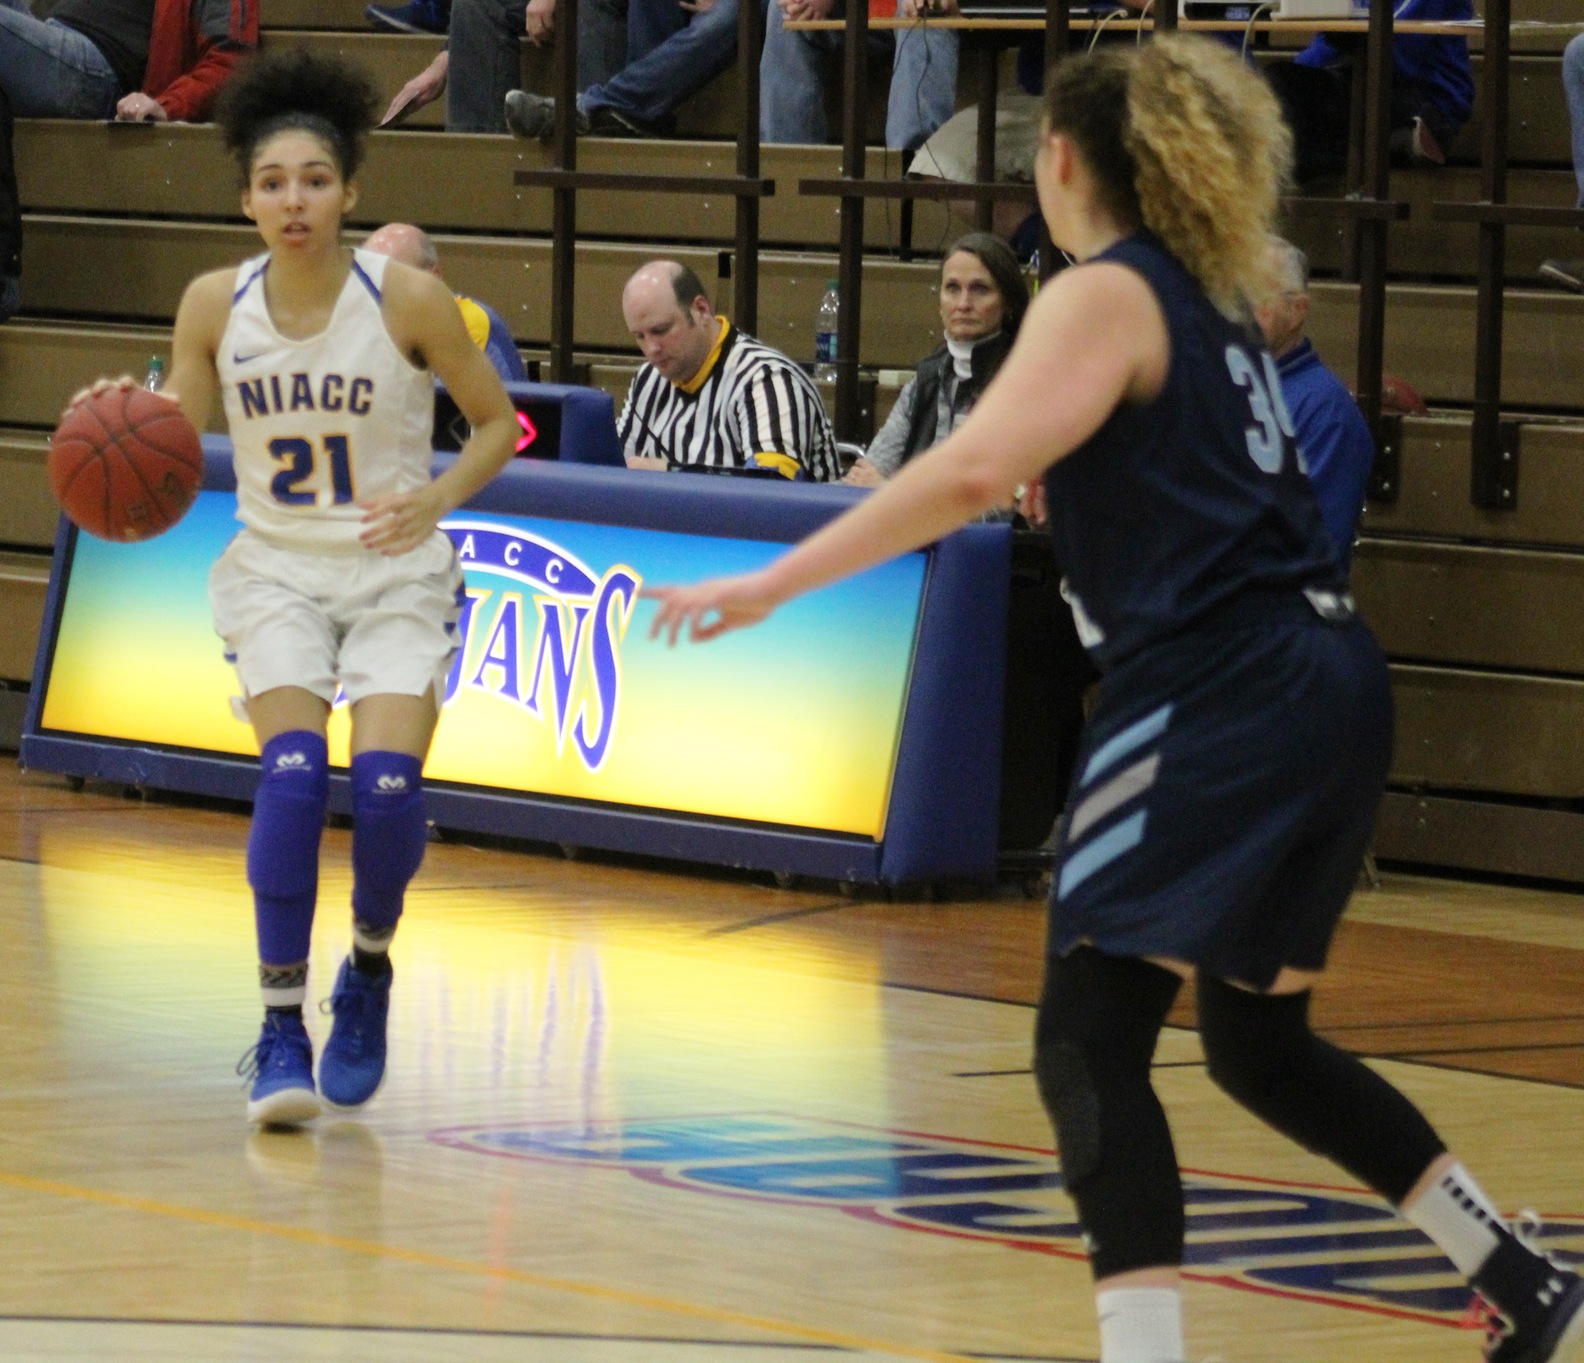 NIACC's Jada Buford looks to make a move in last Wednesday's game against Iowa Central.